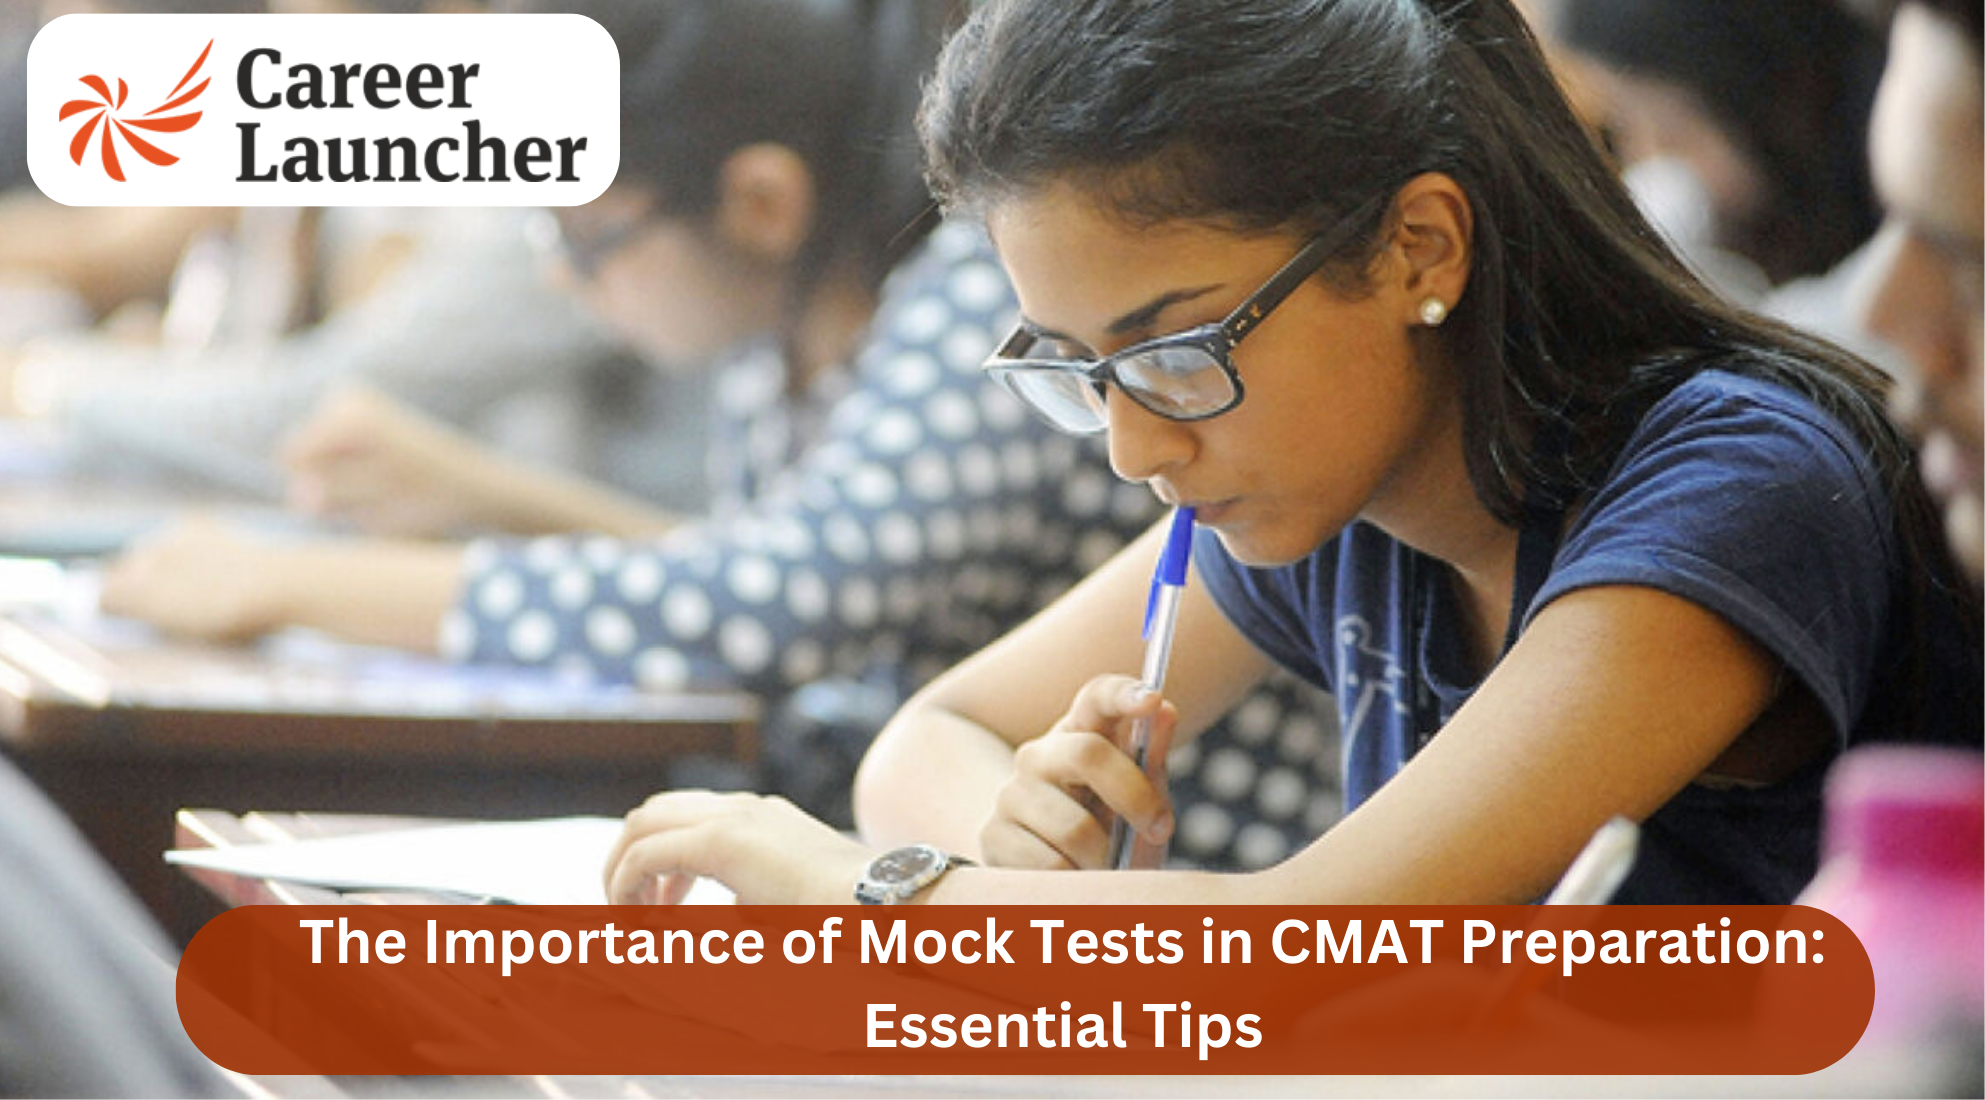 The Importance of Mock Tests in CMAT Preparation: Essential Tips